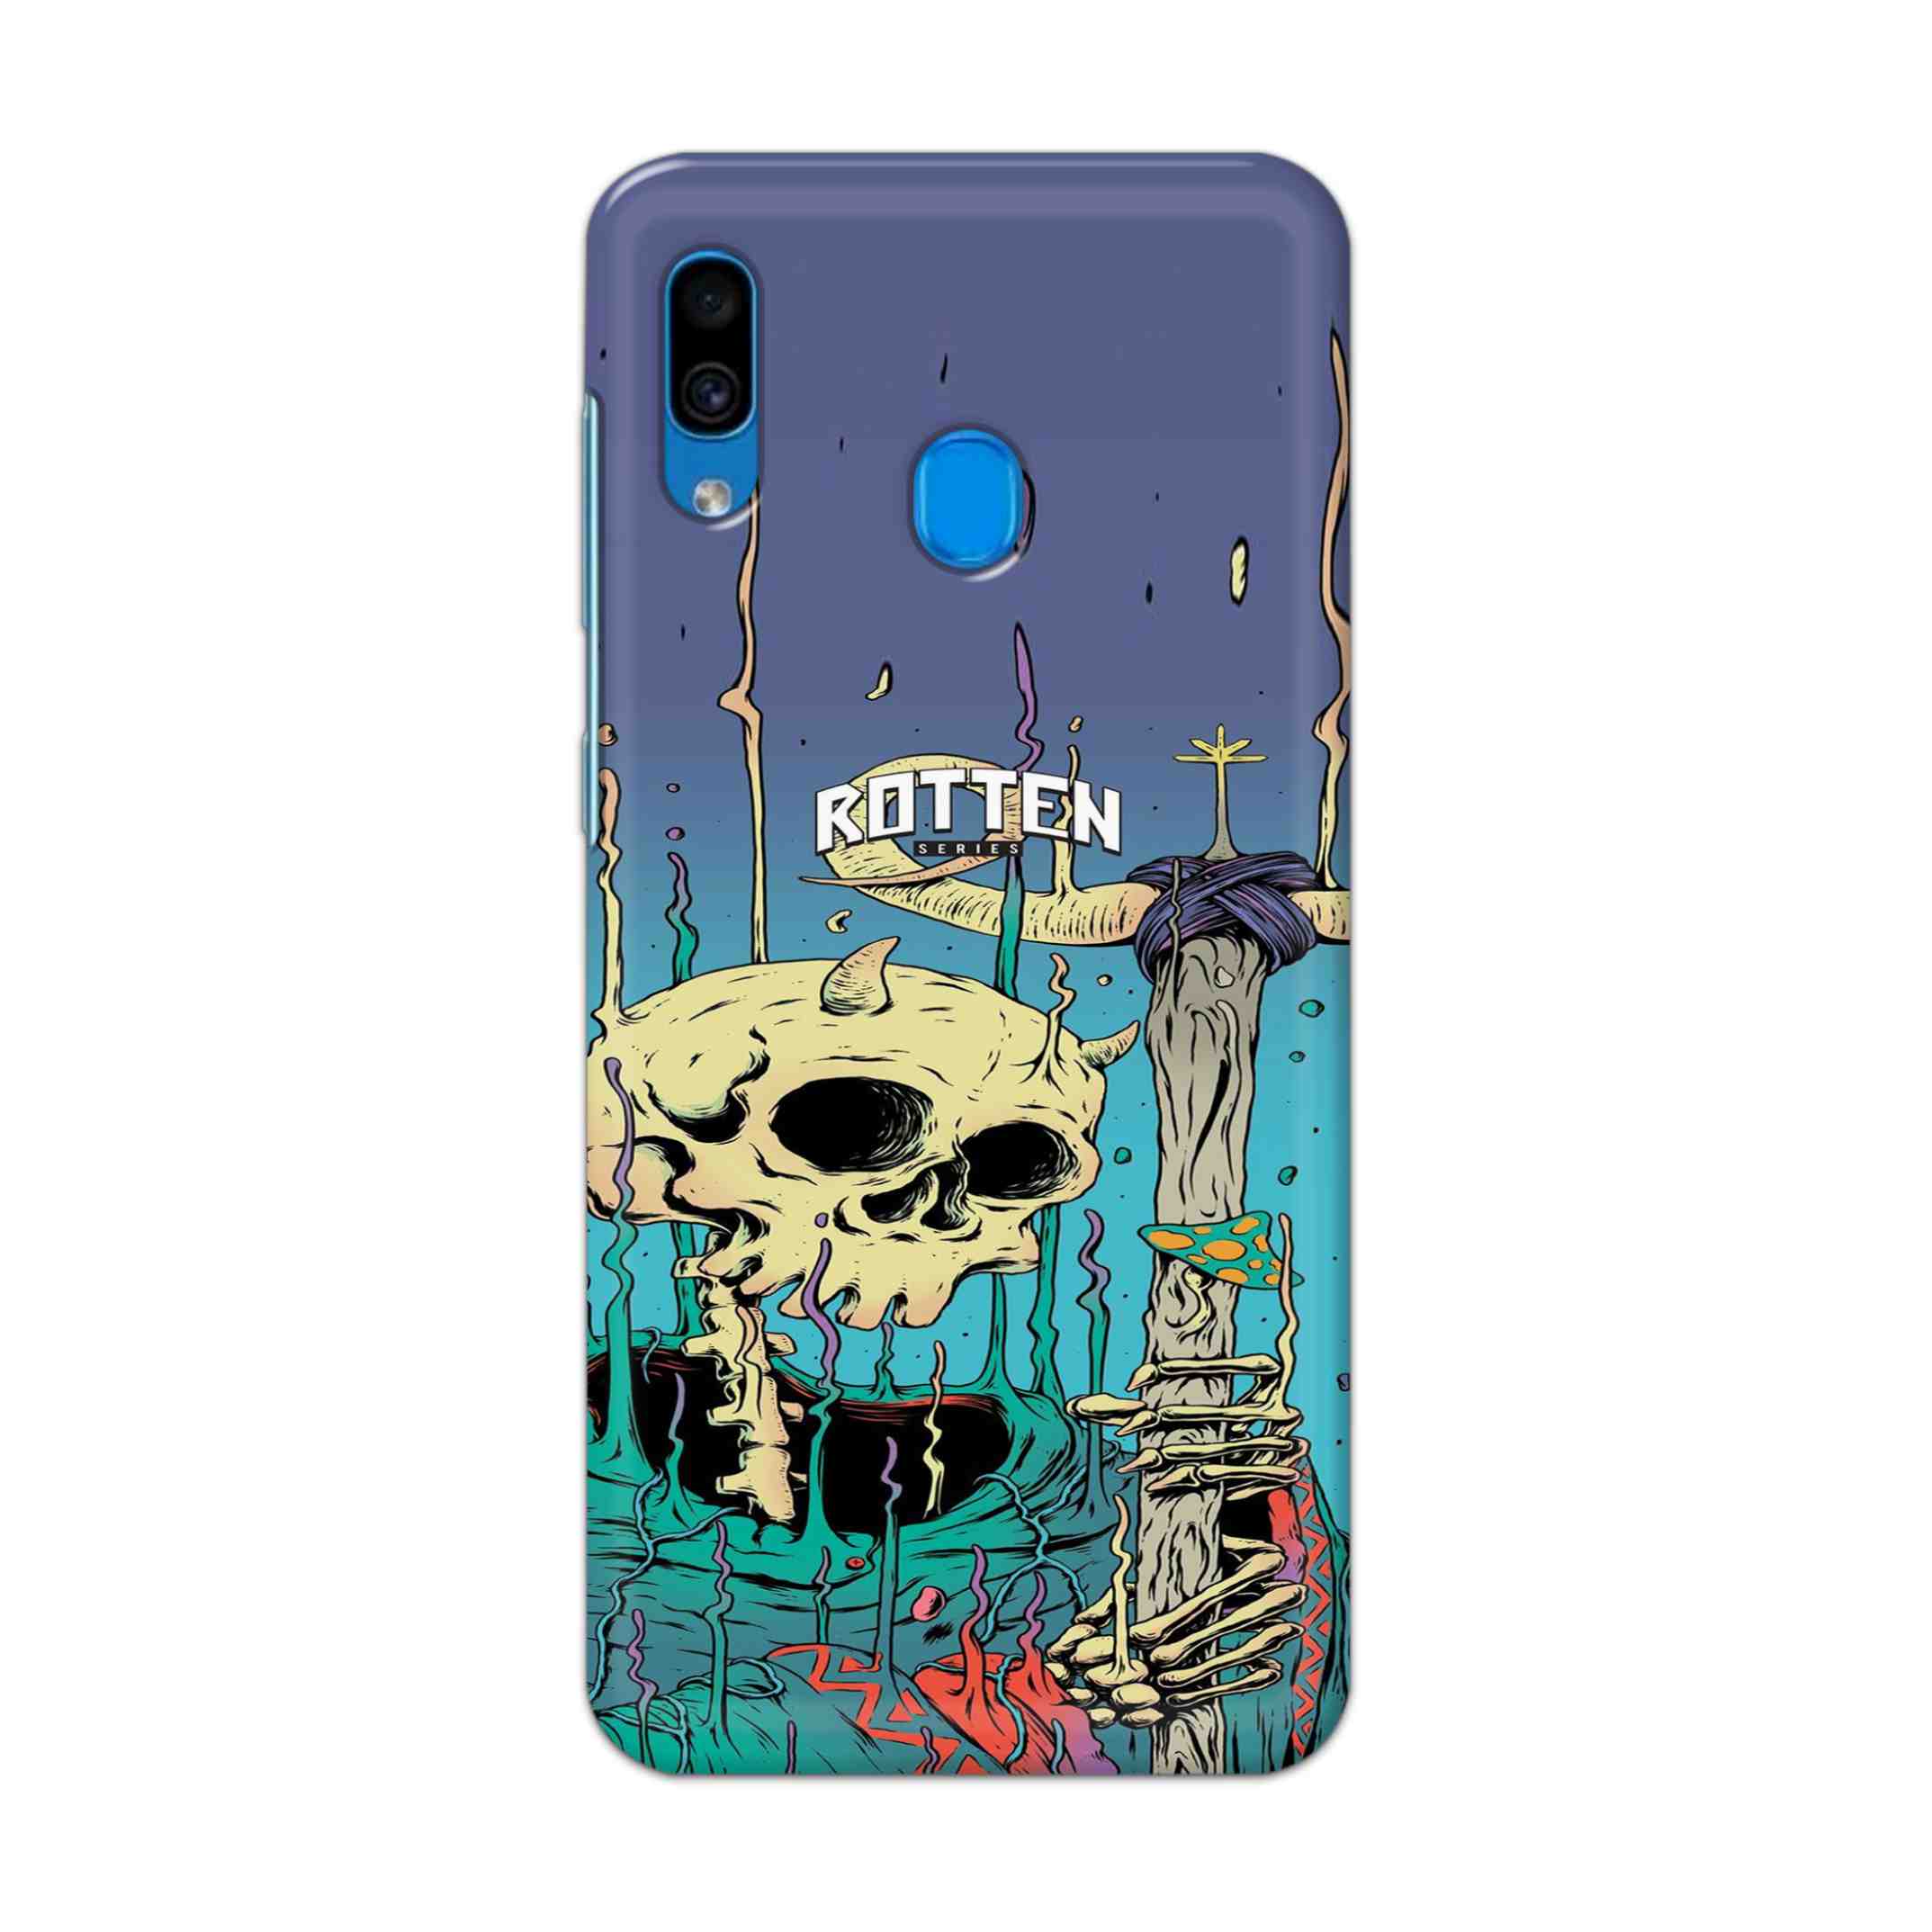 Buy Skull Hard Back Mobile Phone Case Cover For Samsung Galaxy A30 Online